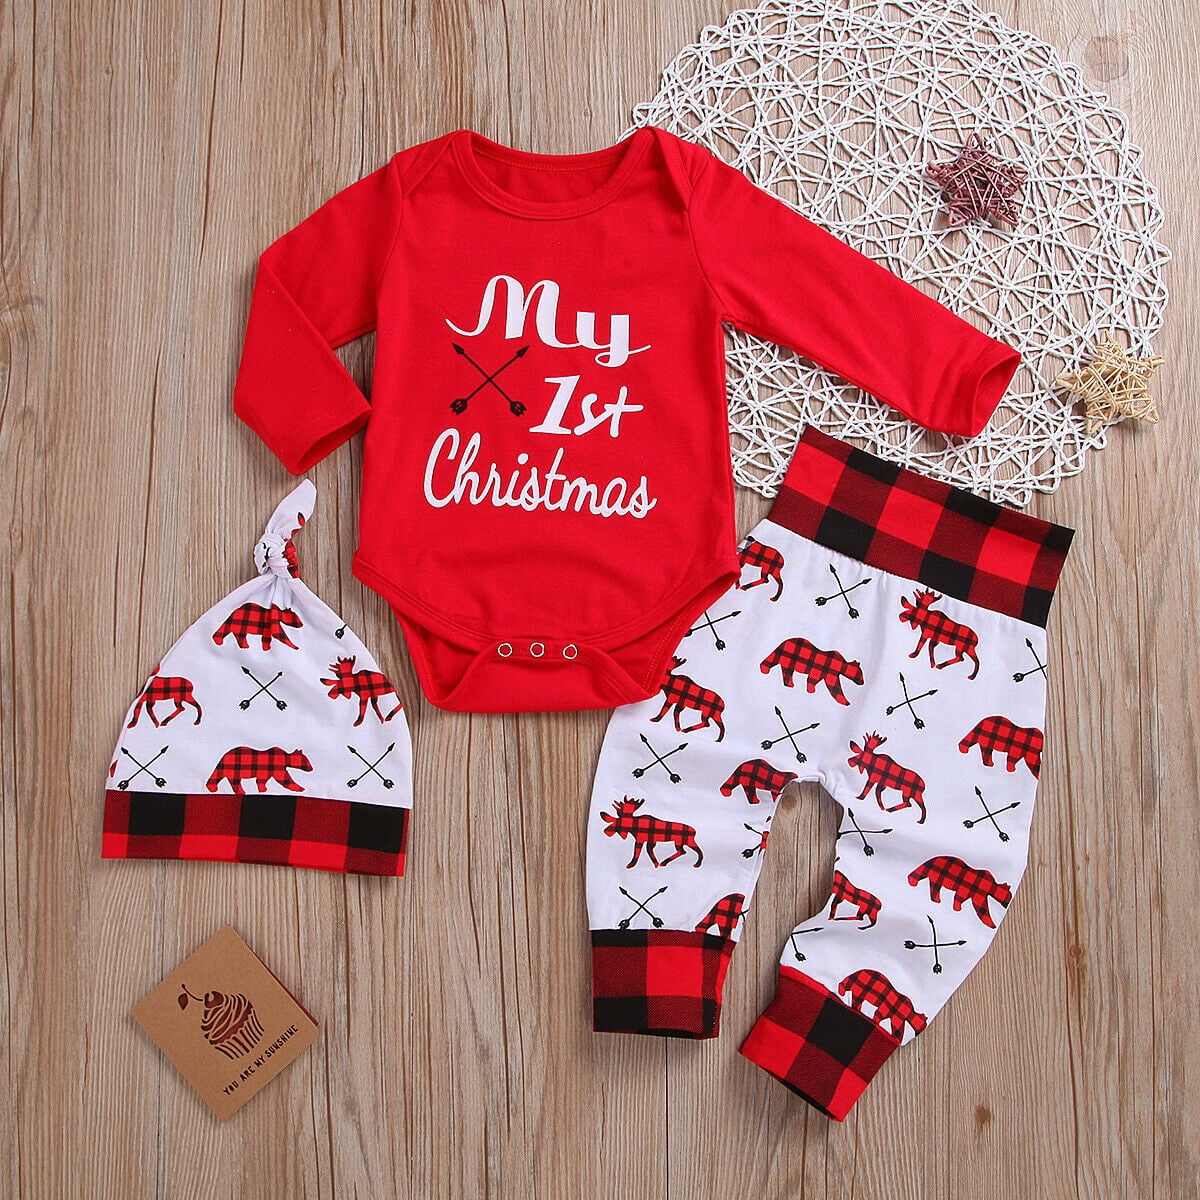 0-3 Months, Red Gallity Infant Baby Boy Girl Christmas Outfit My First Christmas Romper Bodysuit Onesies Dinosaur Pants Hat Fall Clothes 